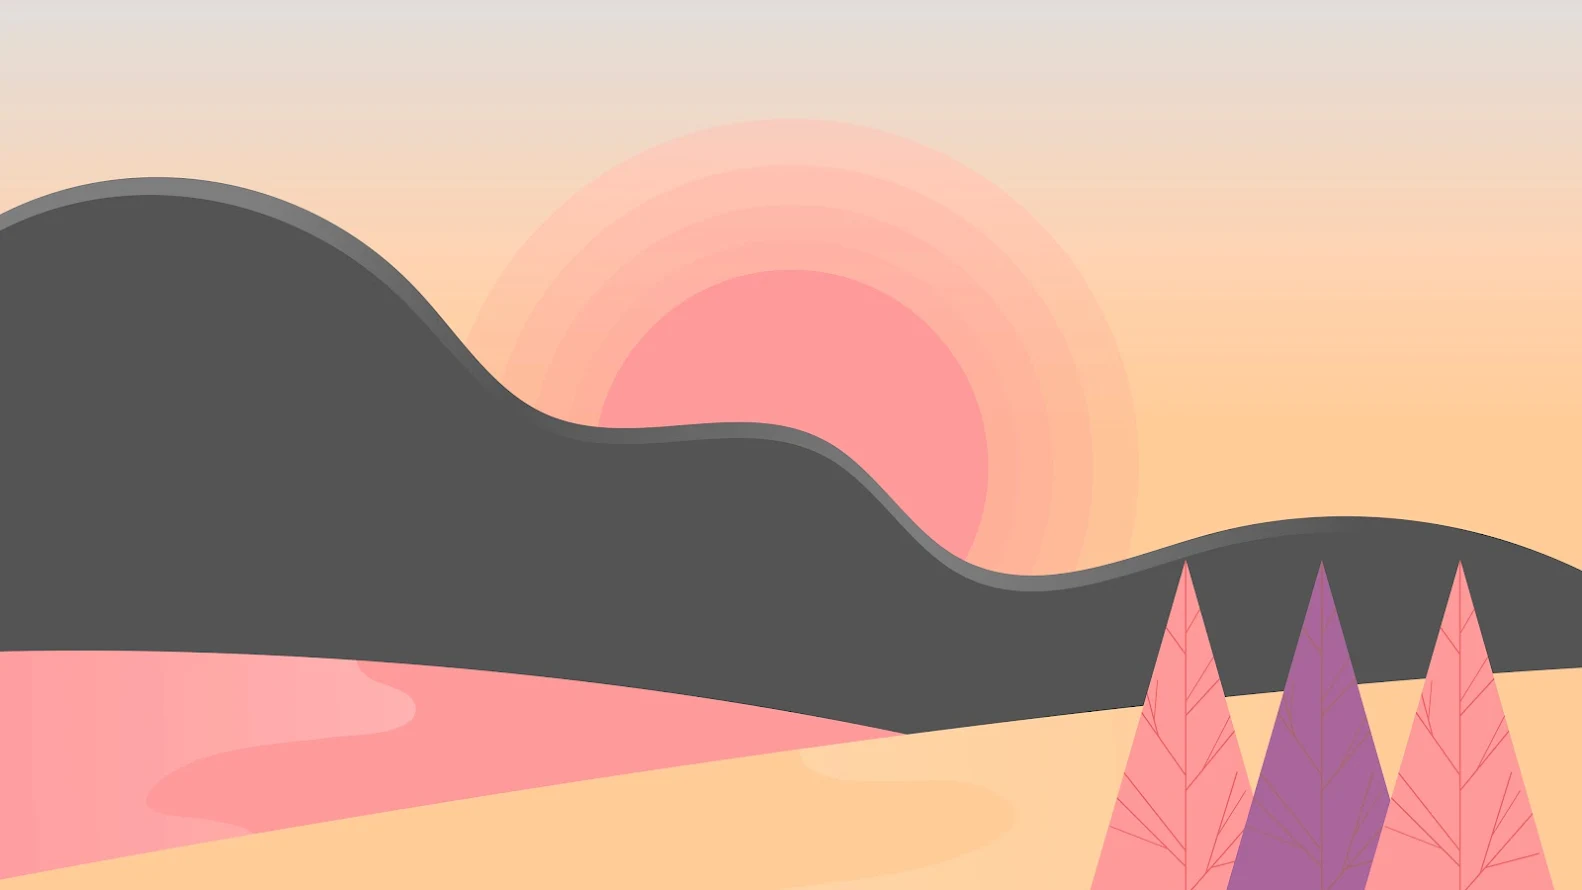 Pc wallpaper 4k of minimalist graphic design of a soft pastel sunset with abstract rolling hills in shades of dark grey, complemented by a trio of stylized pink and purple trees in the foreground.